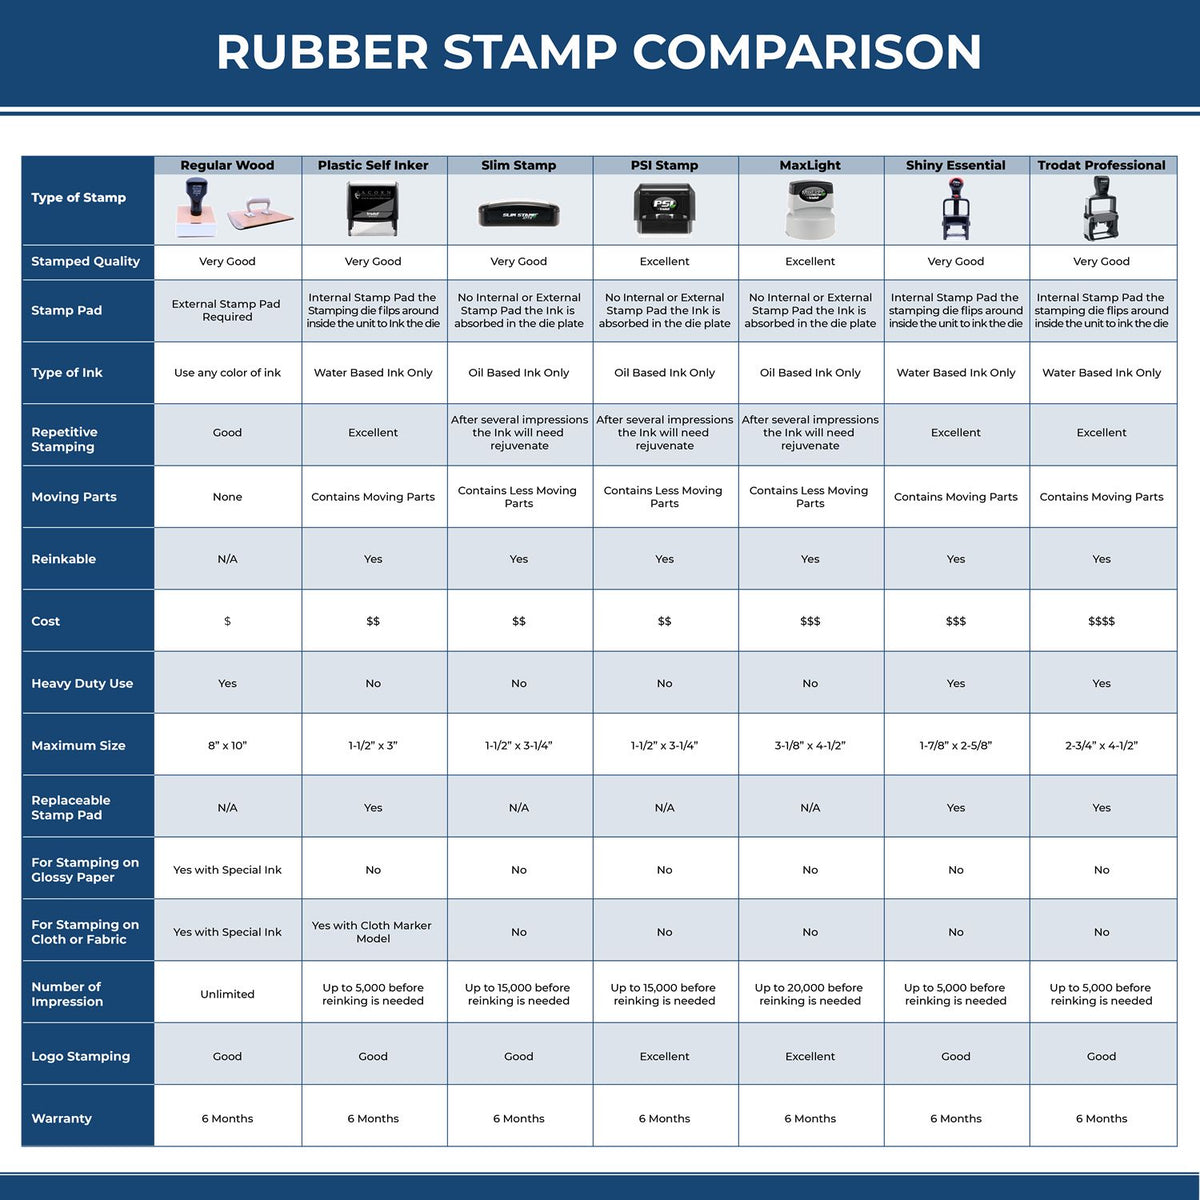 Large Pre-Inked Lets review this with Lamp Stamp 5611SLIM Rubber Stamp Comparison